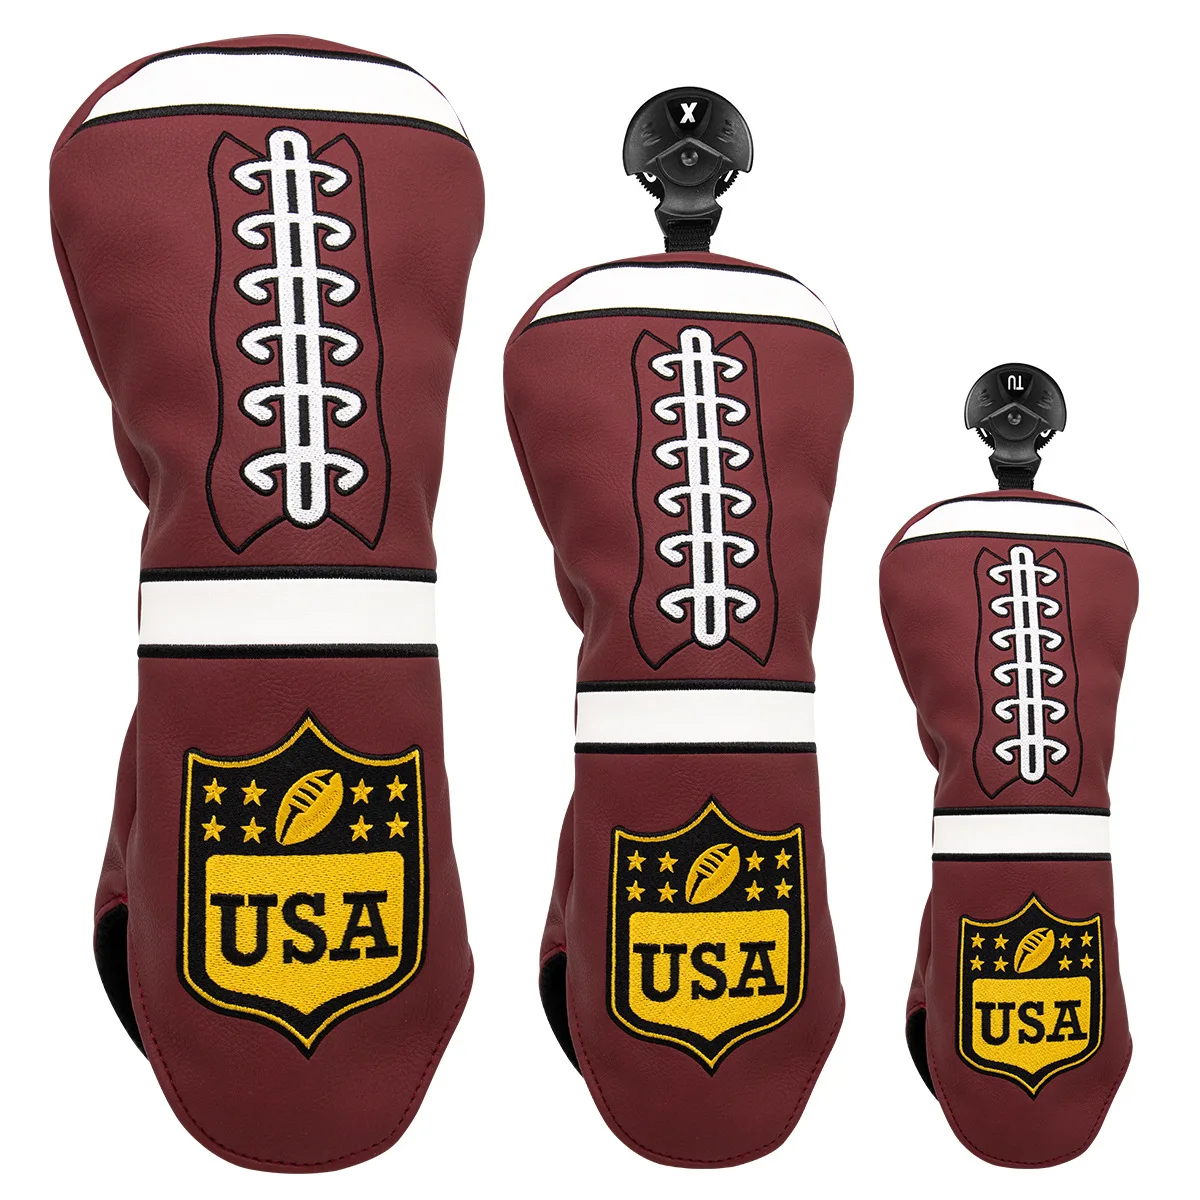 

USA Golf Head Covers for Driver&Fairway Woods -PU Leather Headcovers,L shape putter sleeve,Designed to Fit All Woods and Drivers